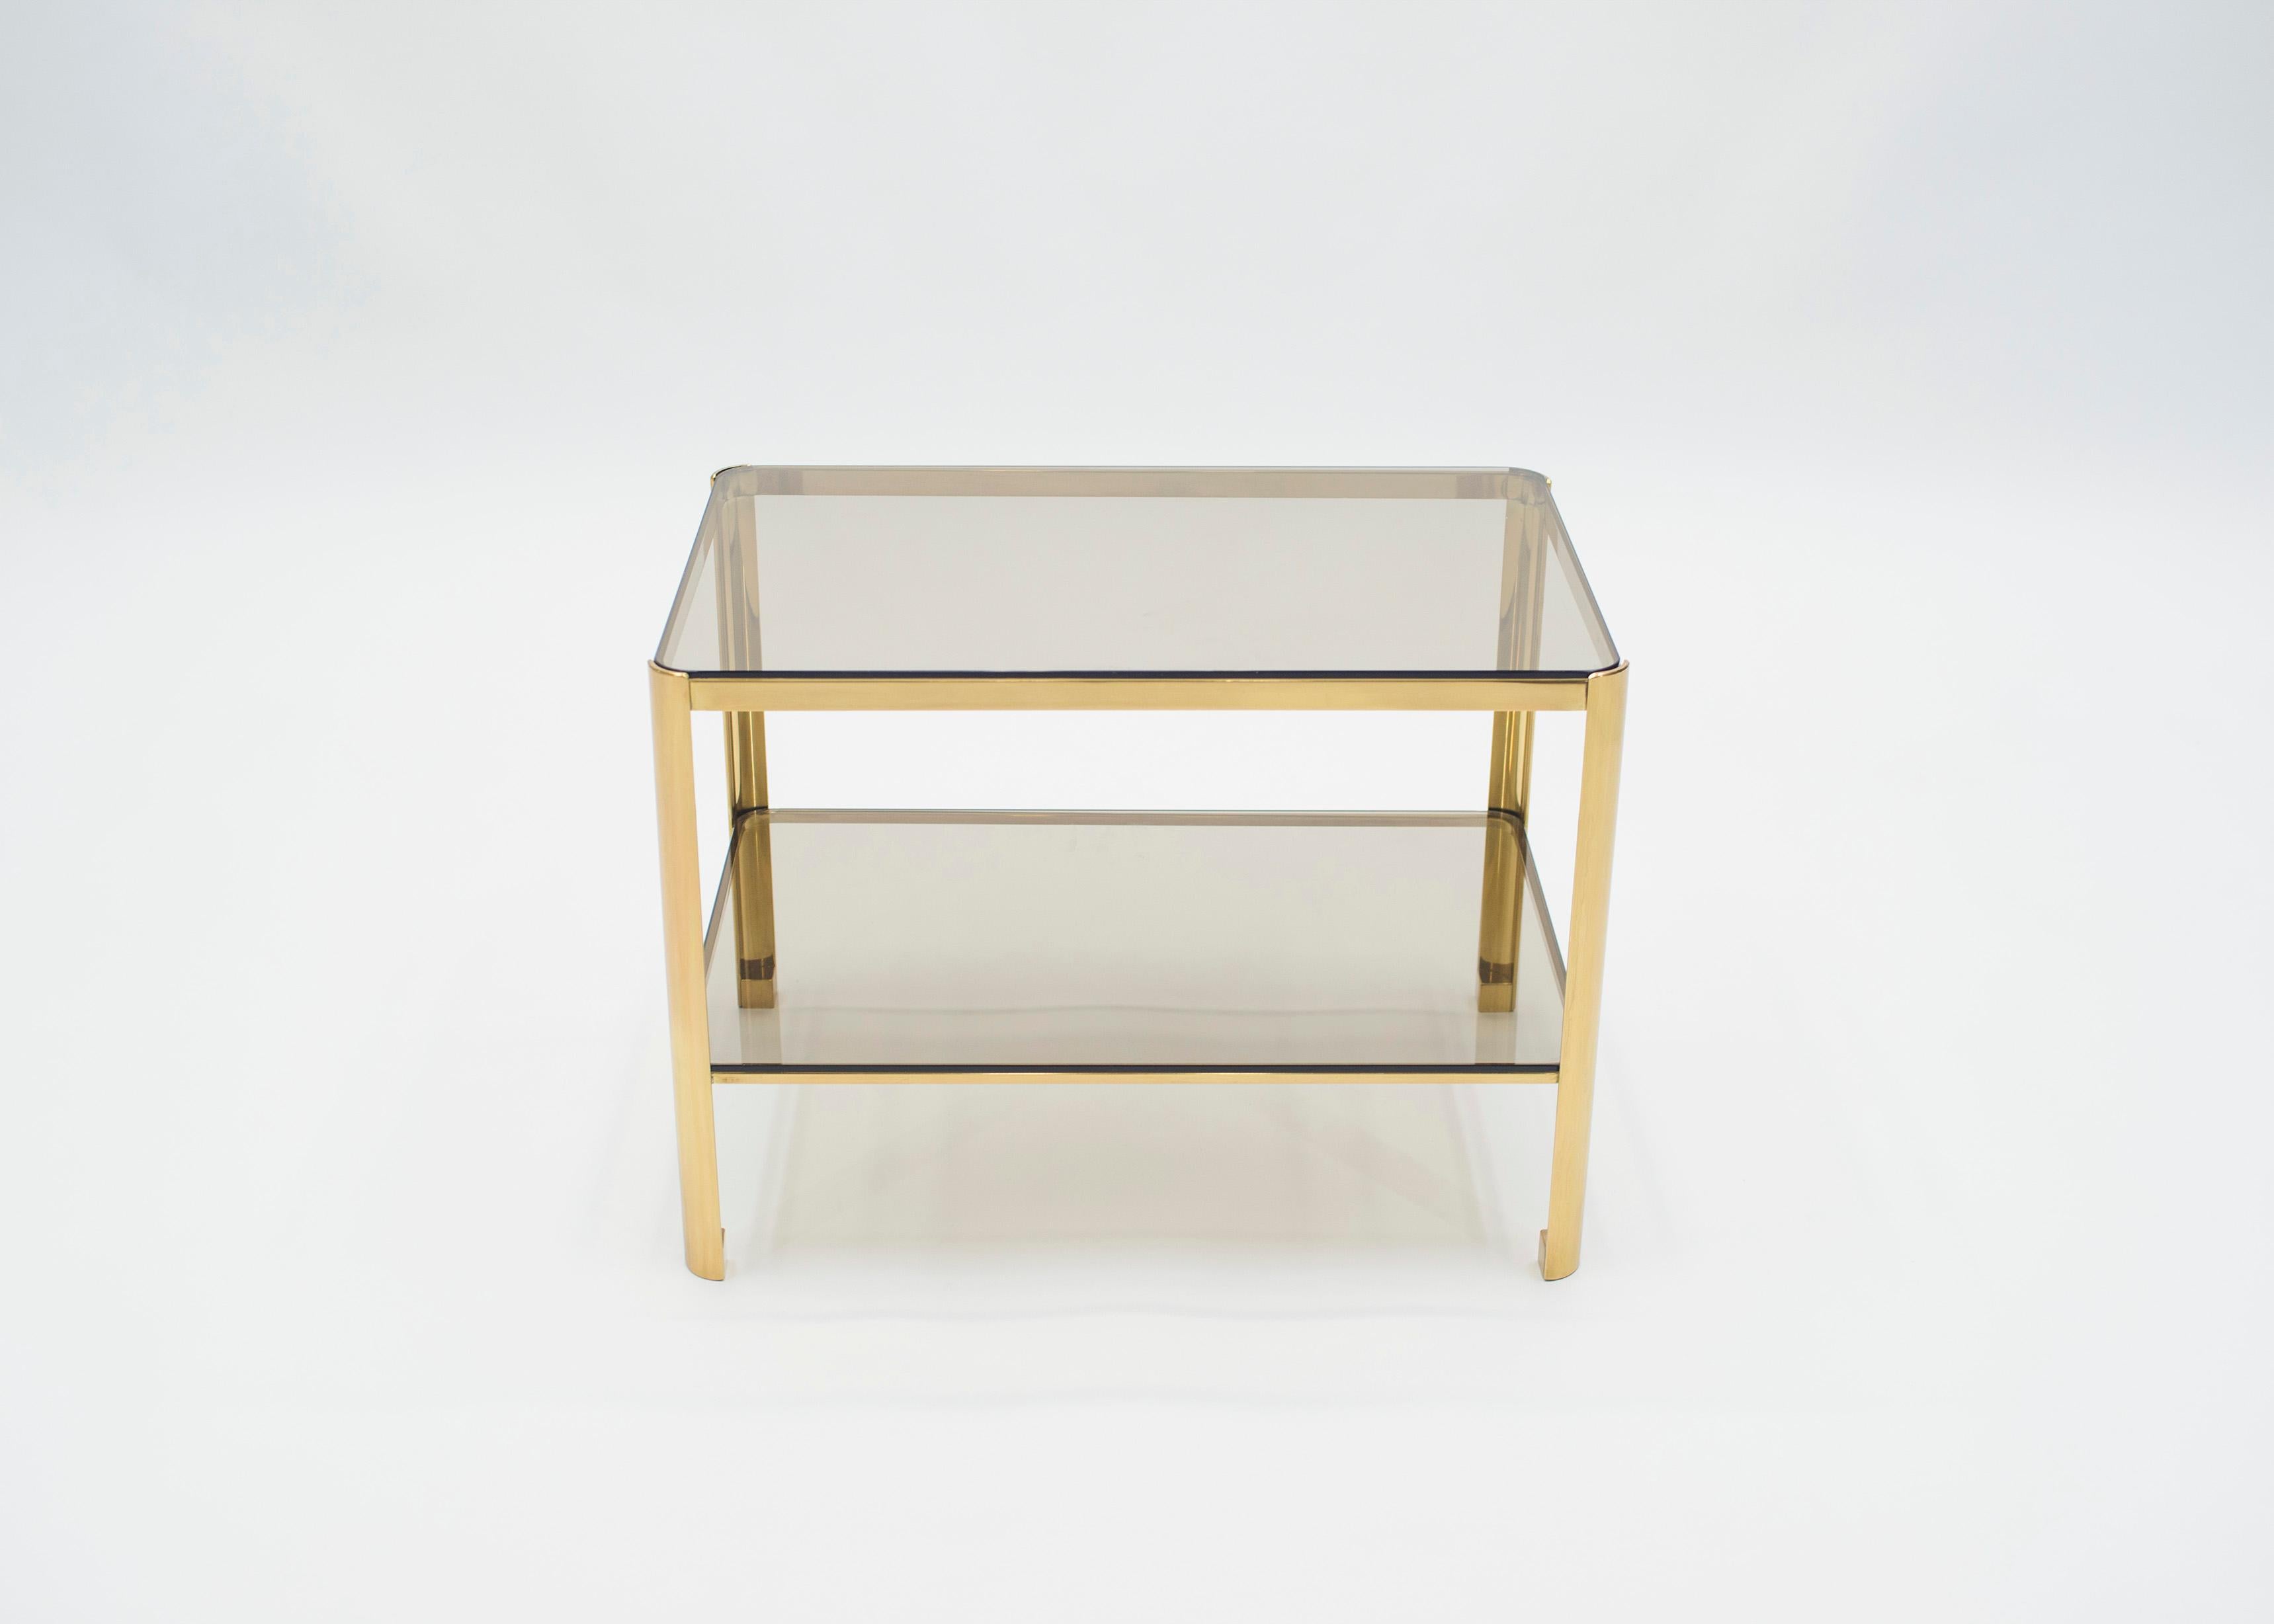 French Bronze Occasional Side Table by Jacques Quinet for Broncz, 1960s (Mitte des 20. Jahrhunderts)